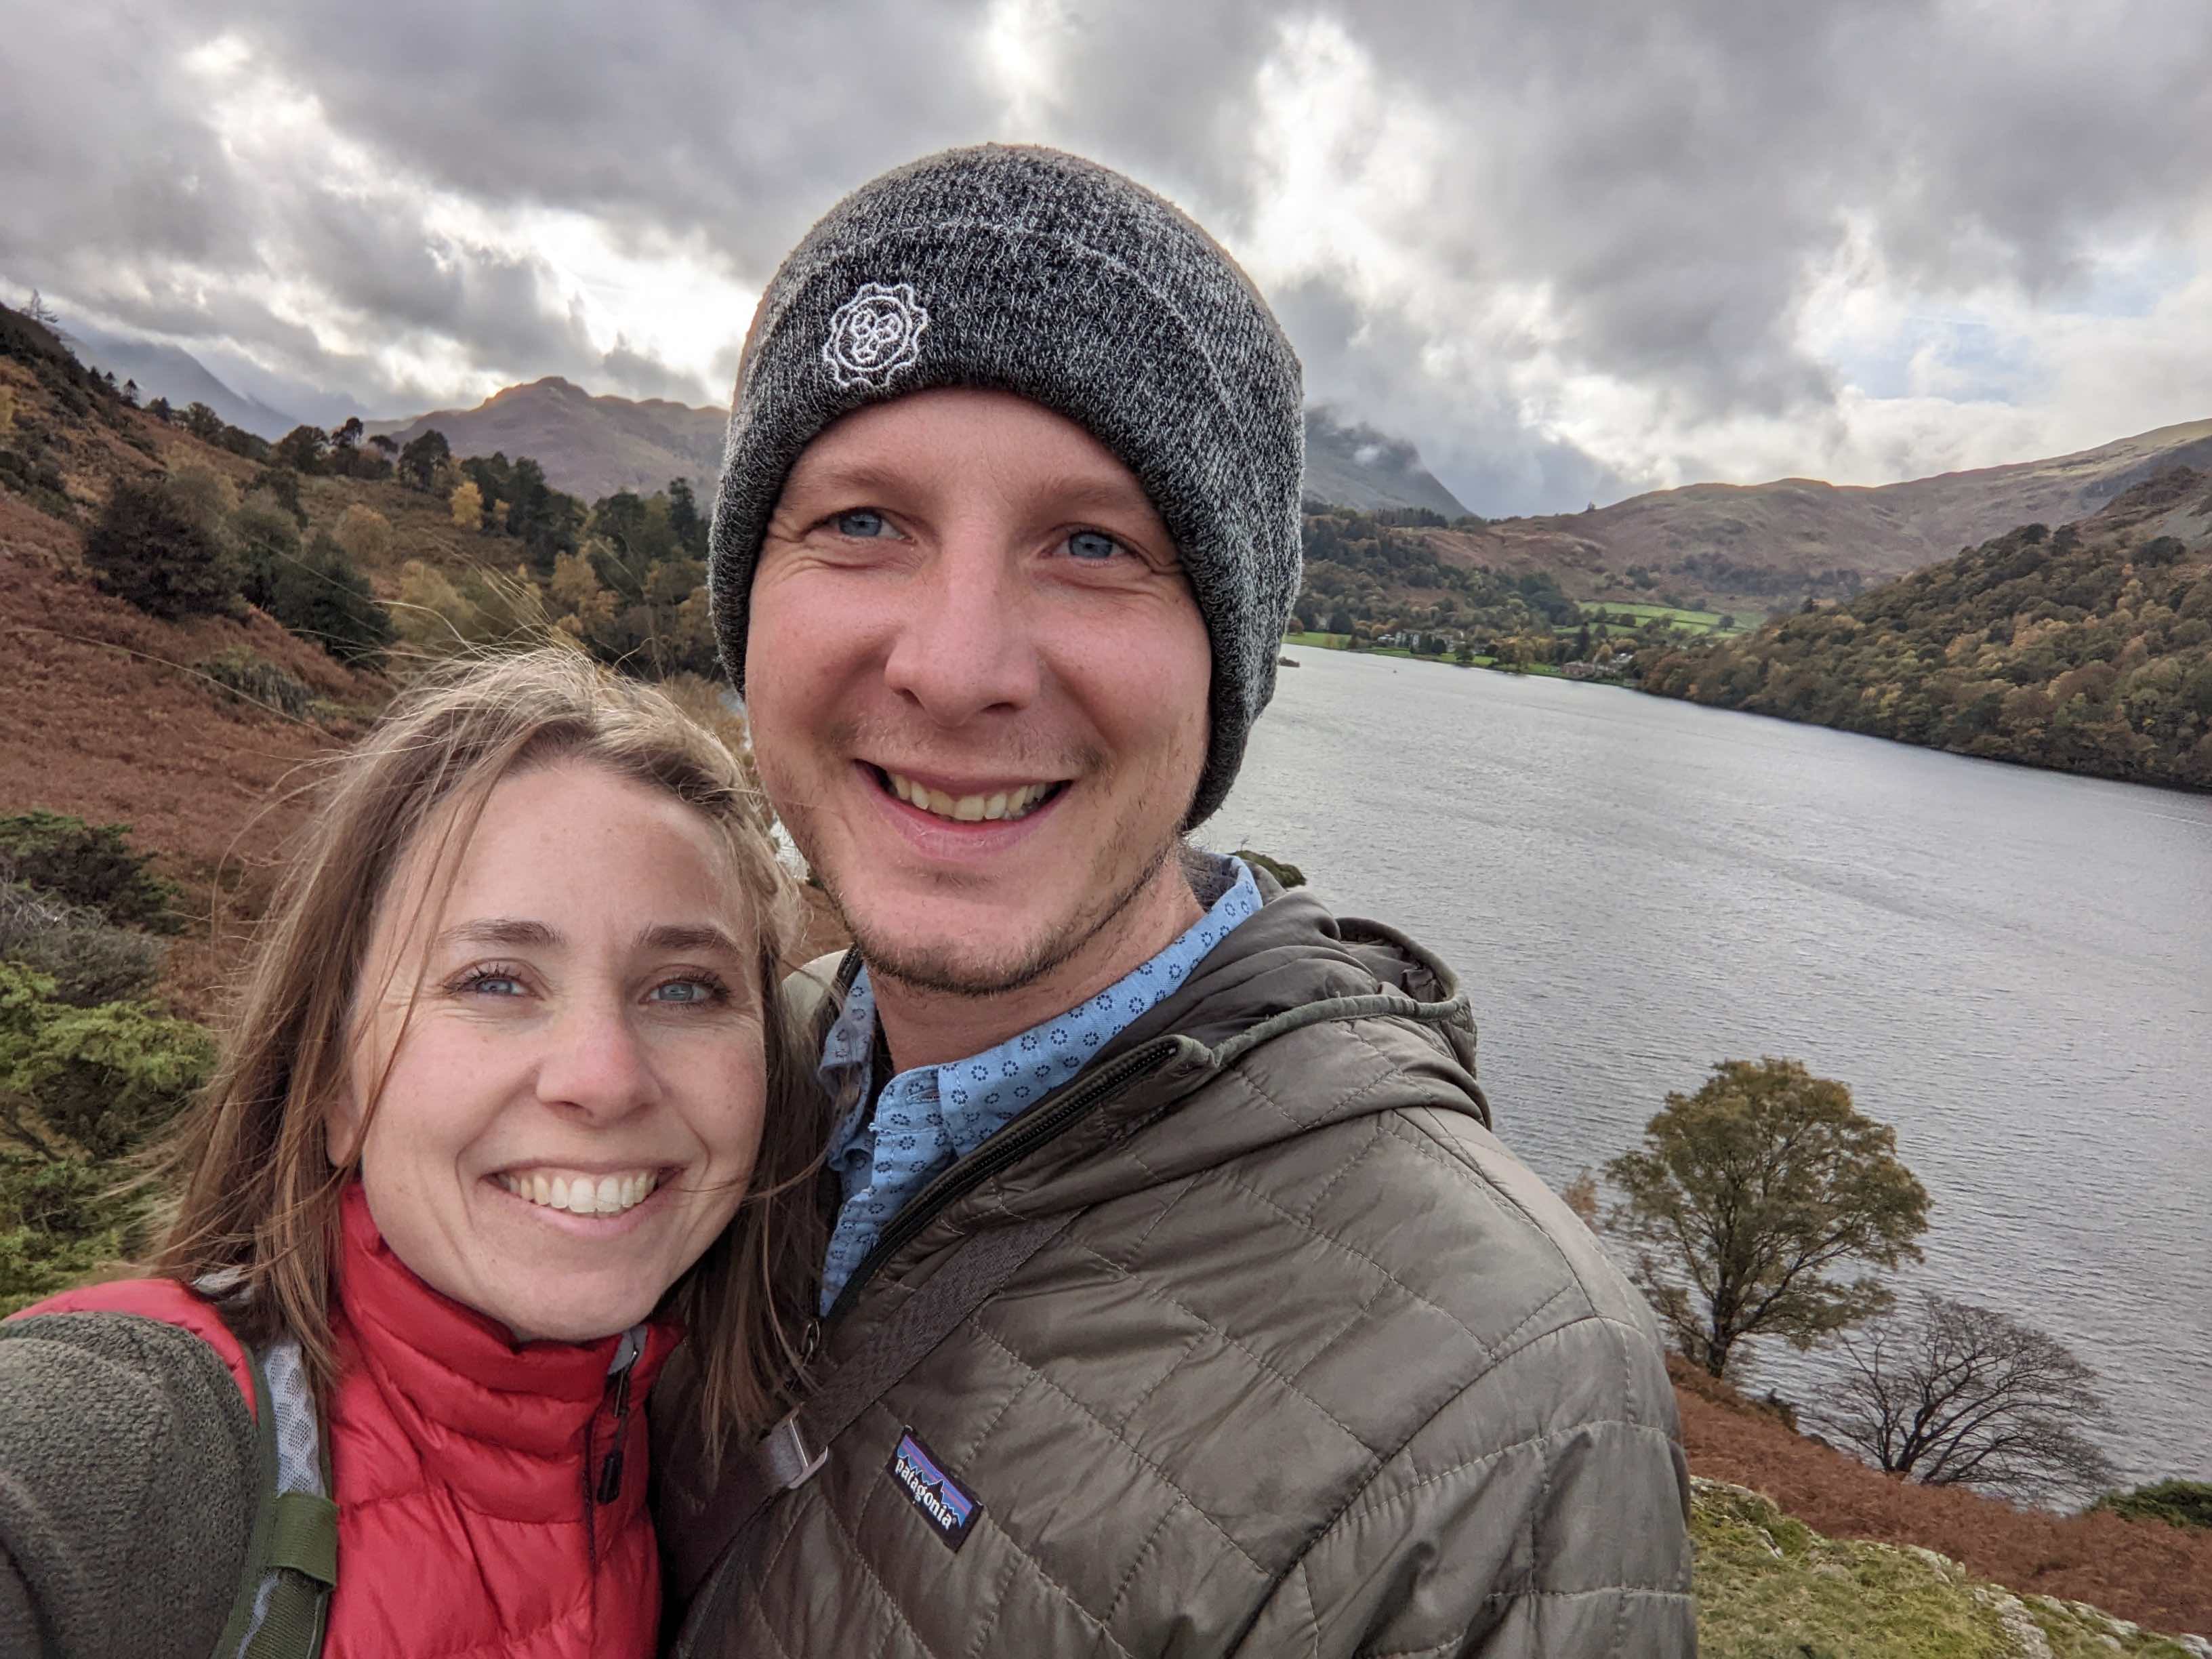 a selfie of a white man and woman smiling with a lake behind them